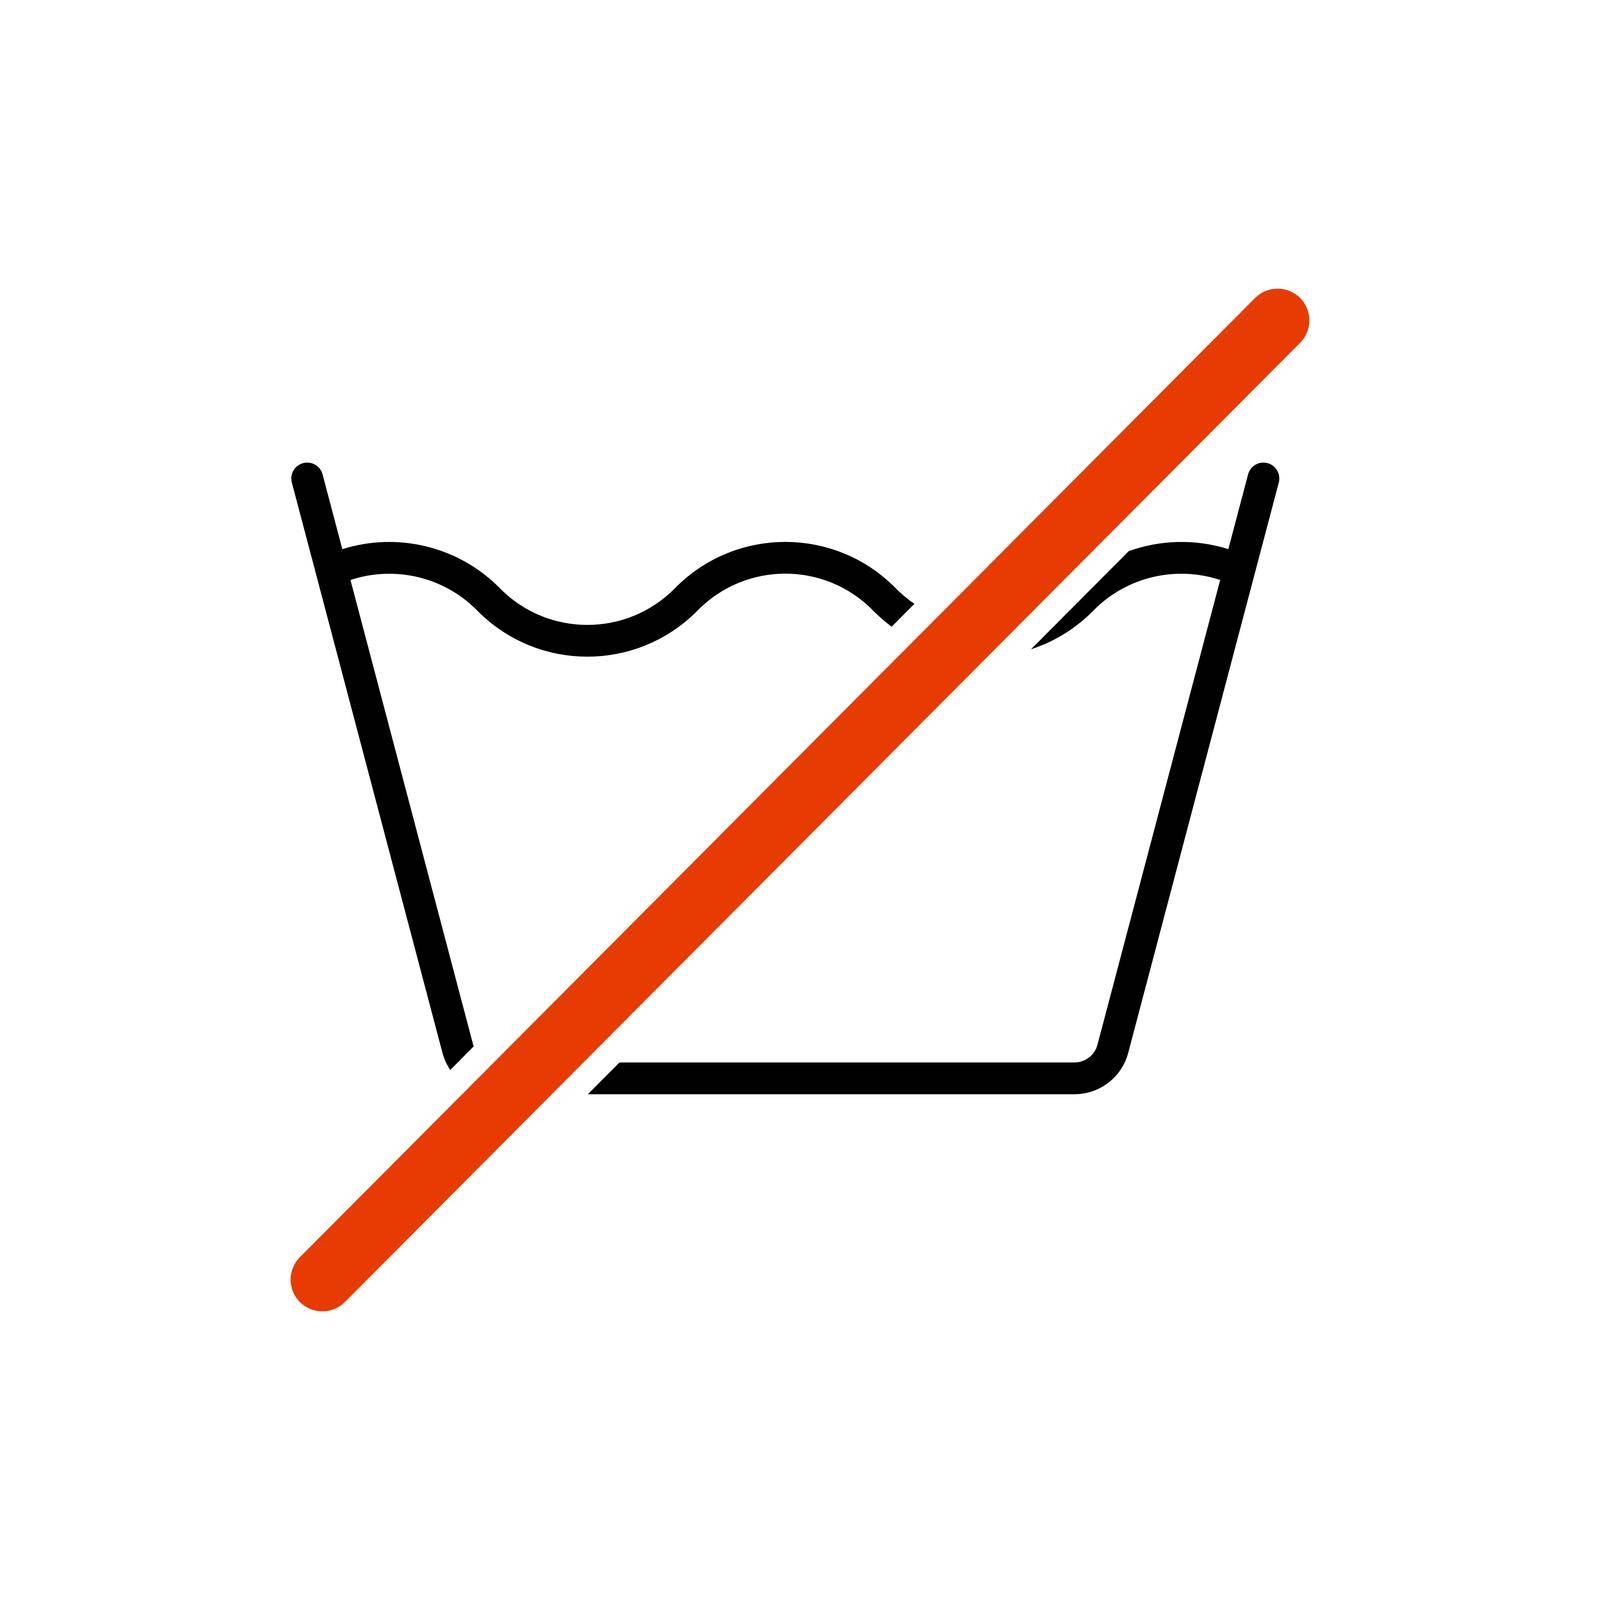 Do not wash icon. Black linear icon. Isolated wash icon. by Chekman